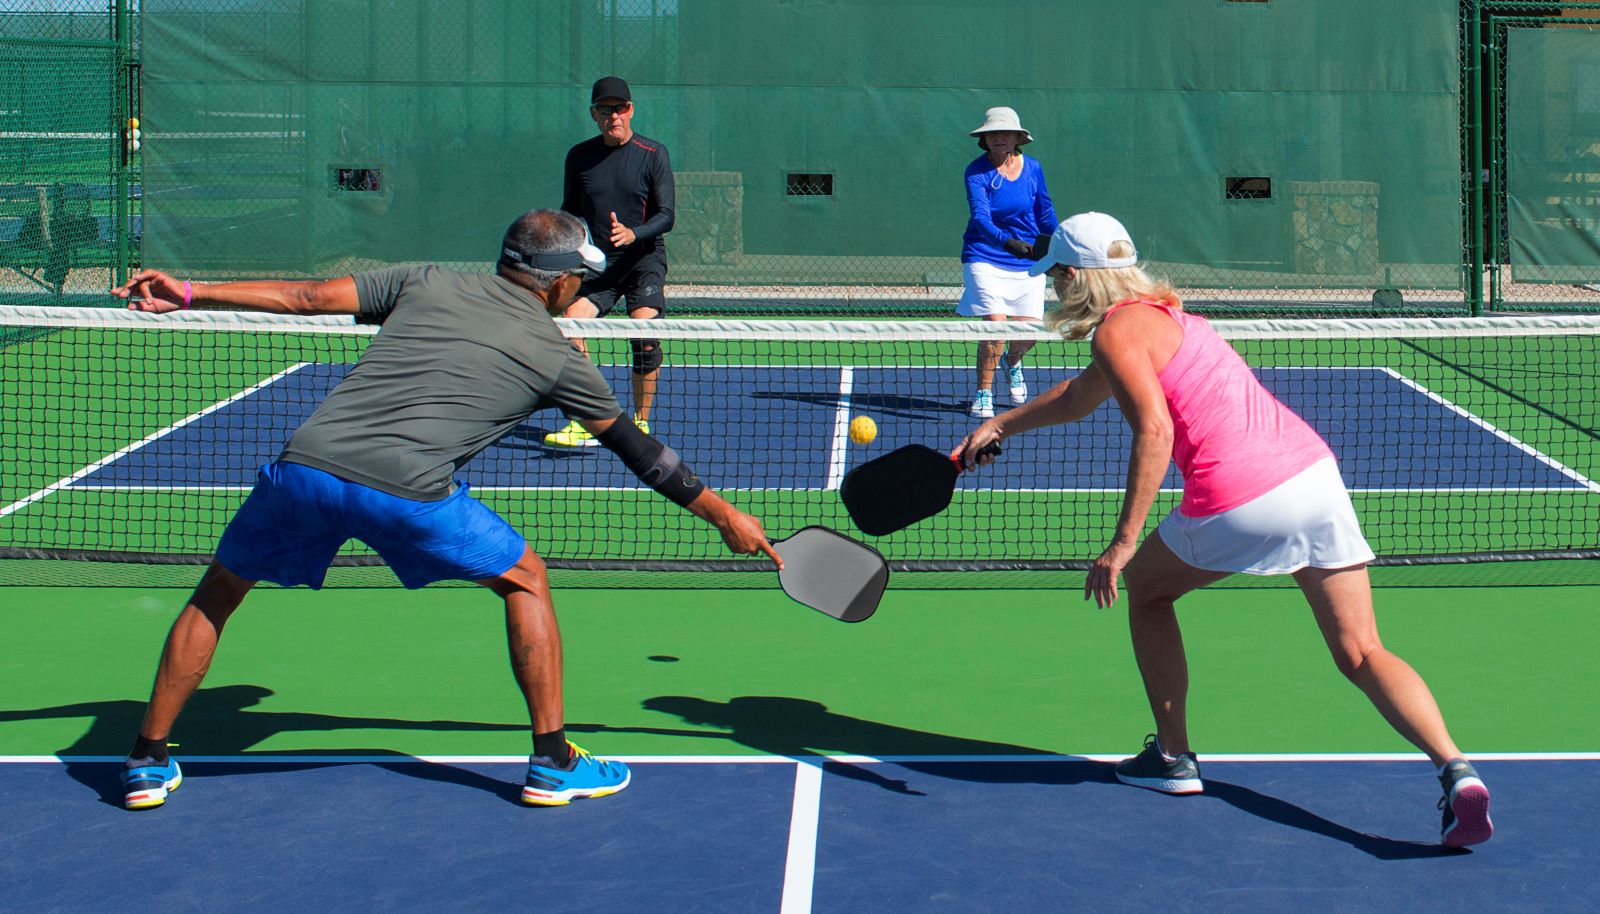 Pickleball Is Growing Fast, and So Are the Injuries